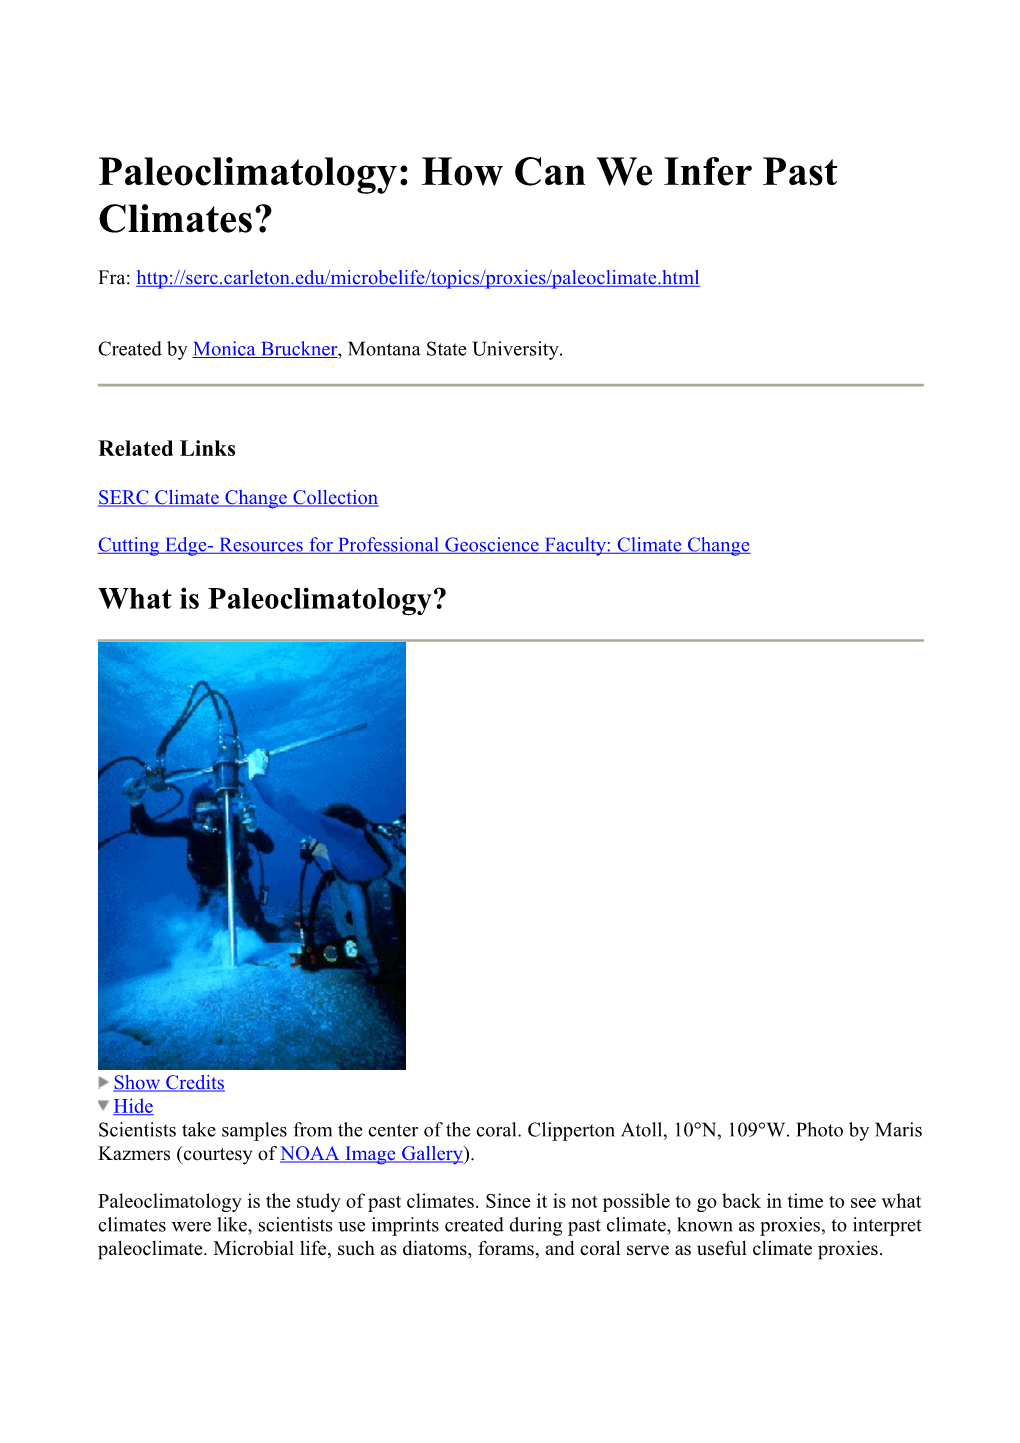 Paleoclimatology: How Can We Infer Past Climates